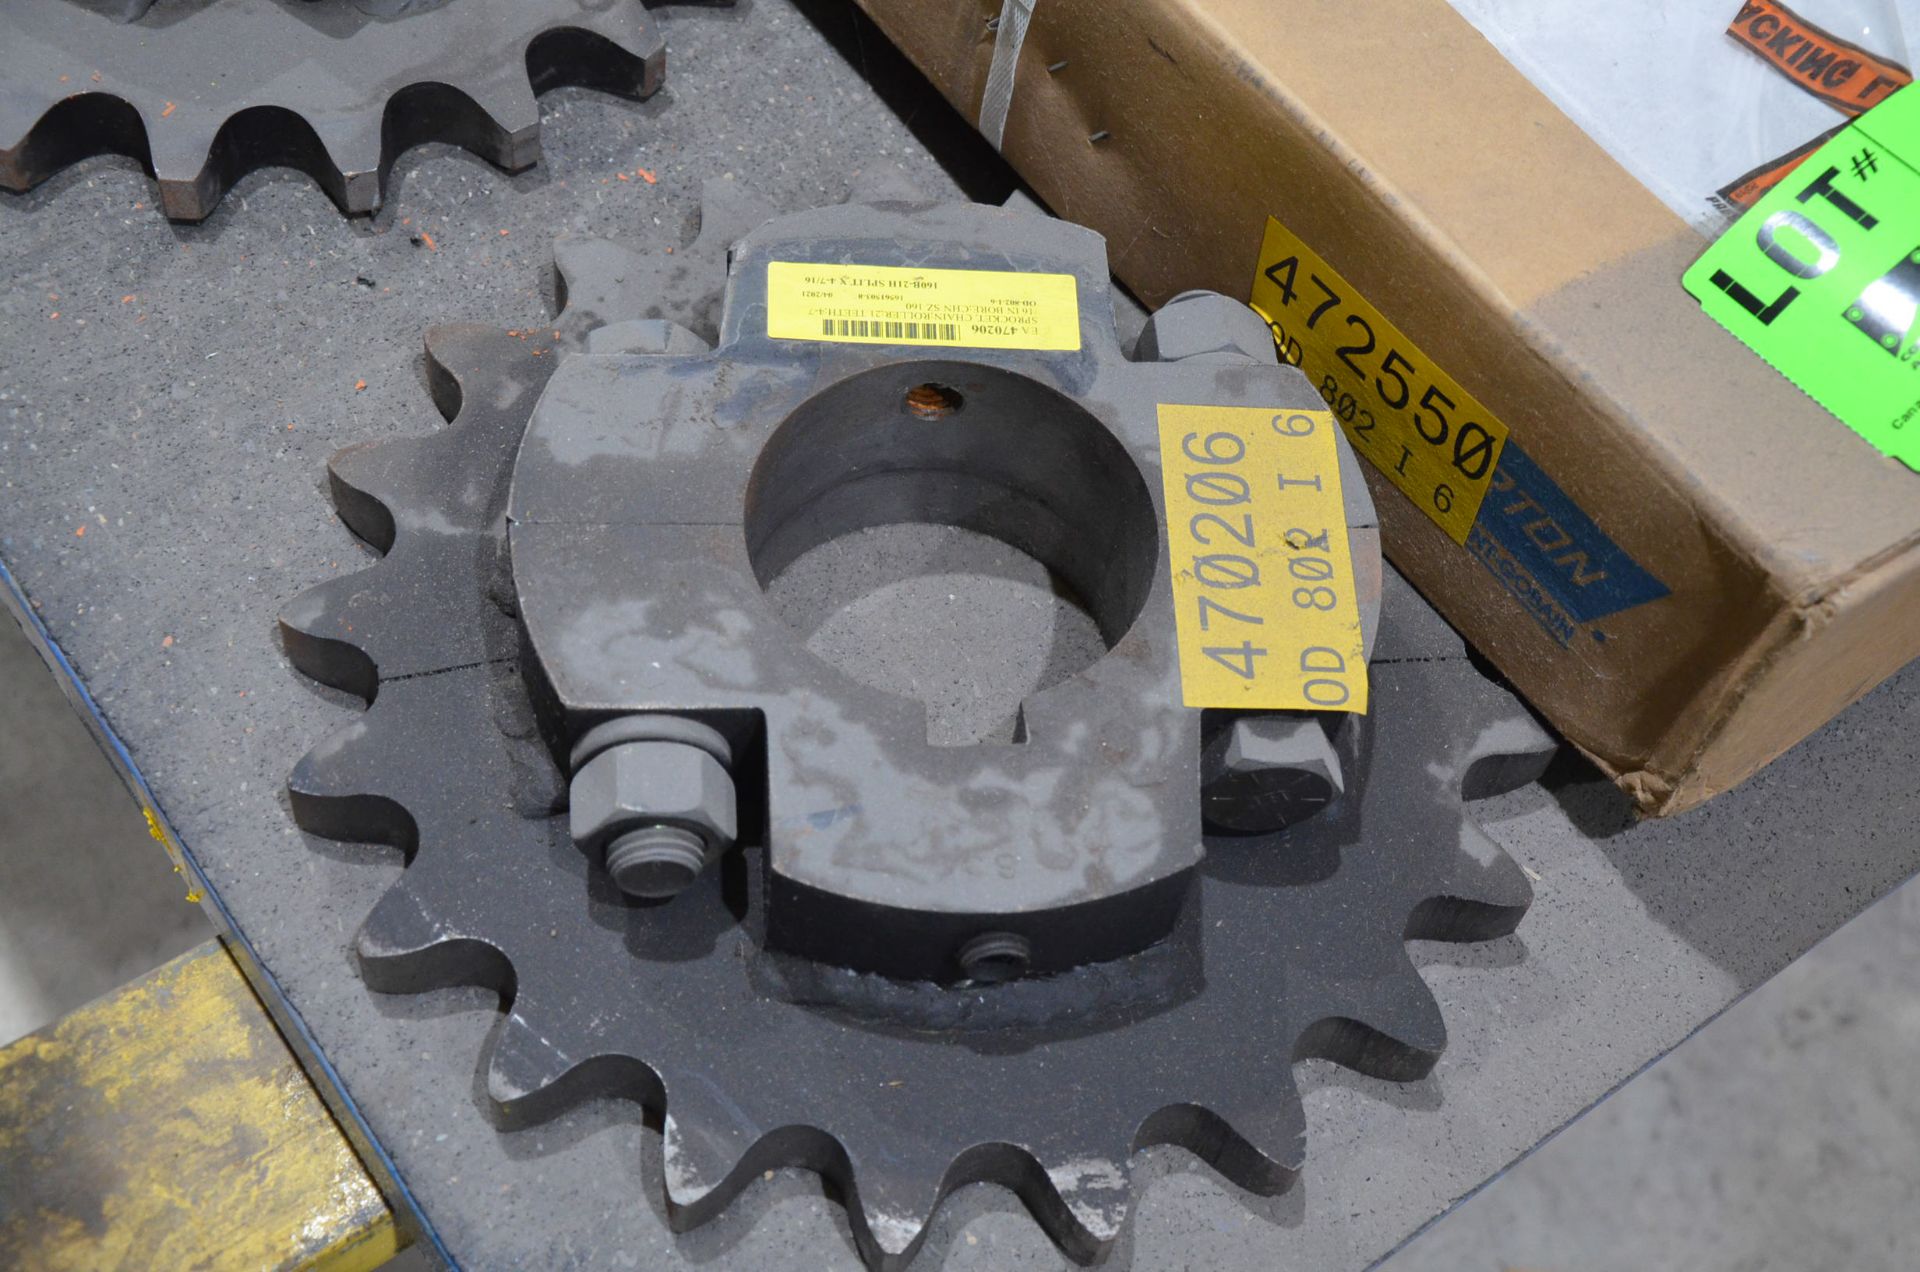 LOT/ CONTENTS OF SHELF - NORTON 20"X3"X7.5" GRINDING WHEEL, CHAIN SPROCKETS AND ELECTRICAL PLUGS - Image 3 of 6